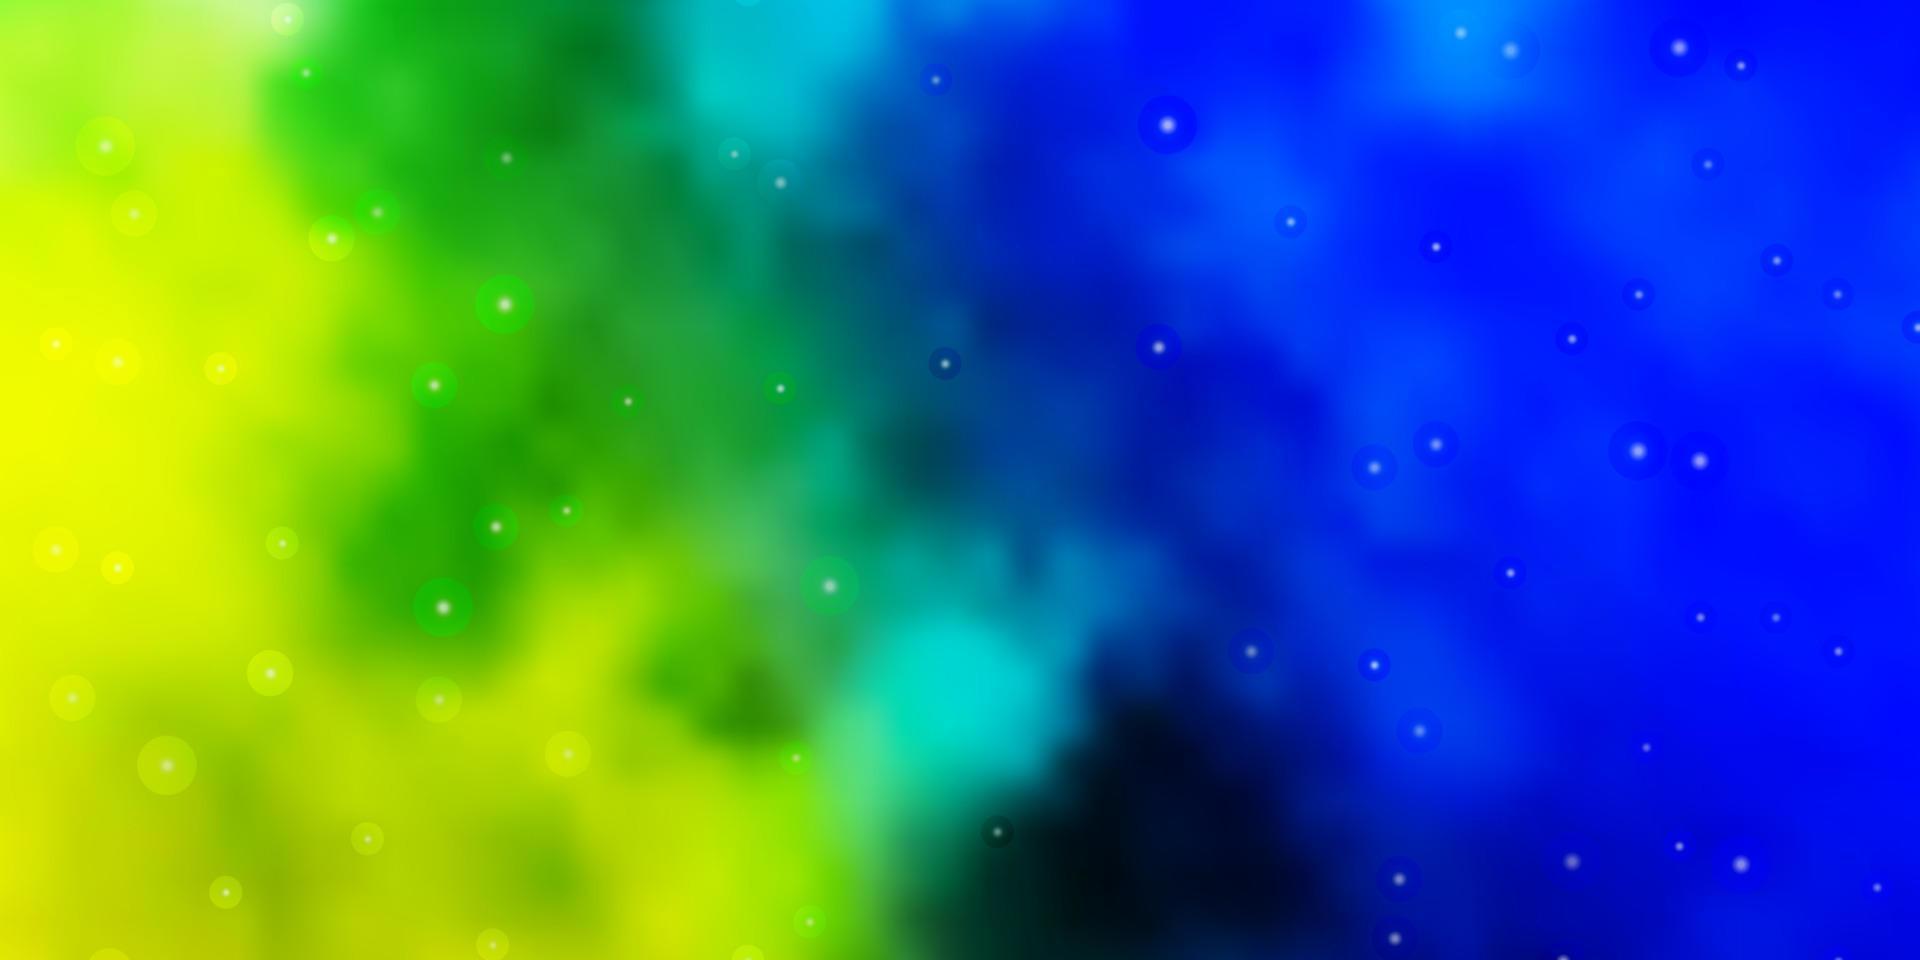 Light Blue, Green vector background with small and big stars.